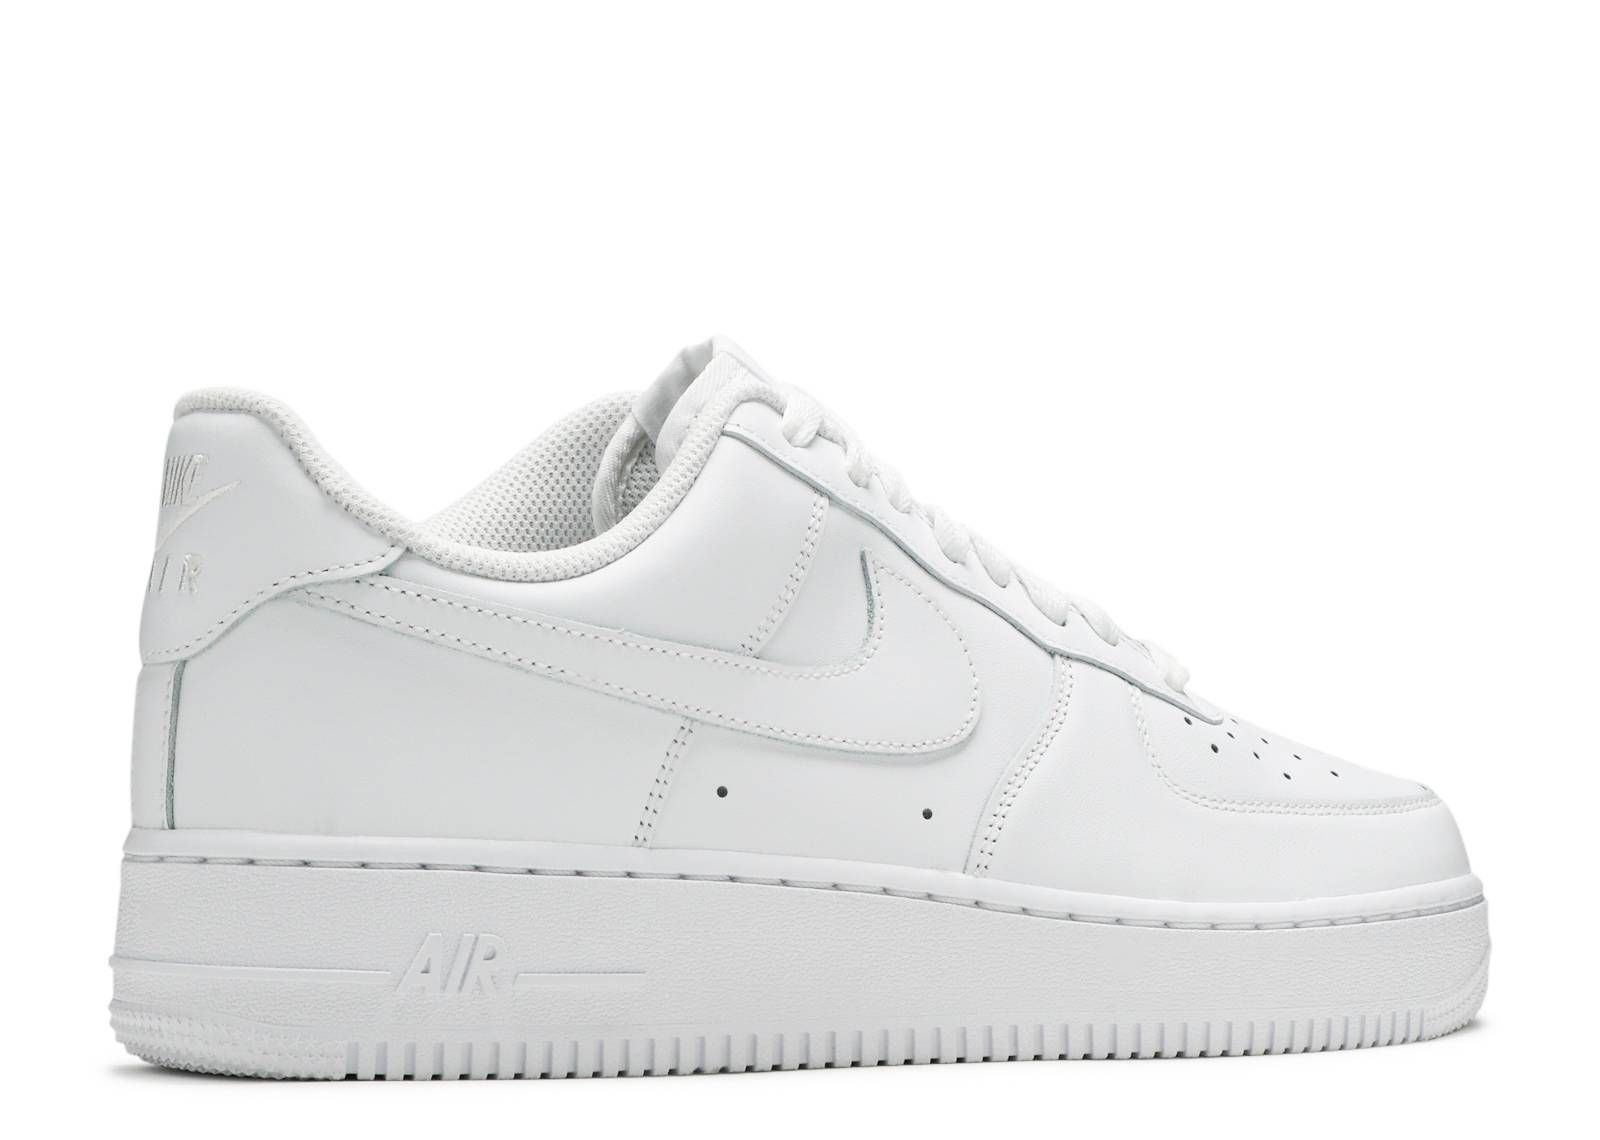 The Nike Air Force 1 Low 07 LV8 Triple White Comes With A Scaley Motif •